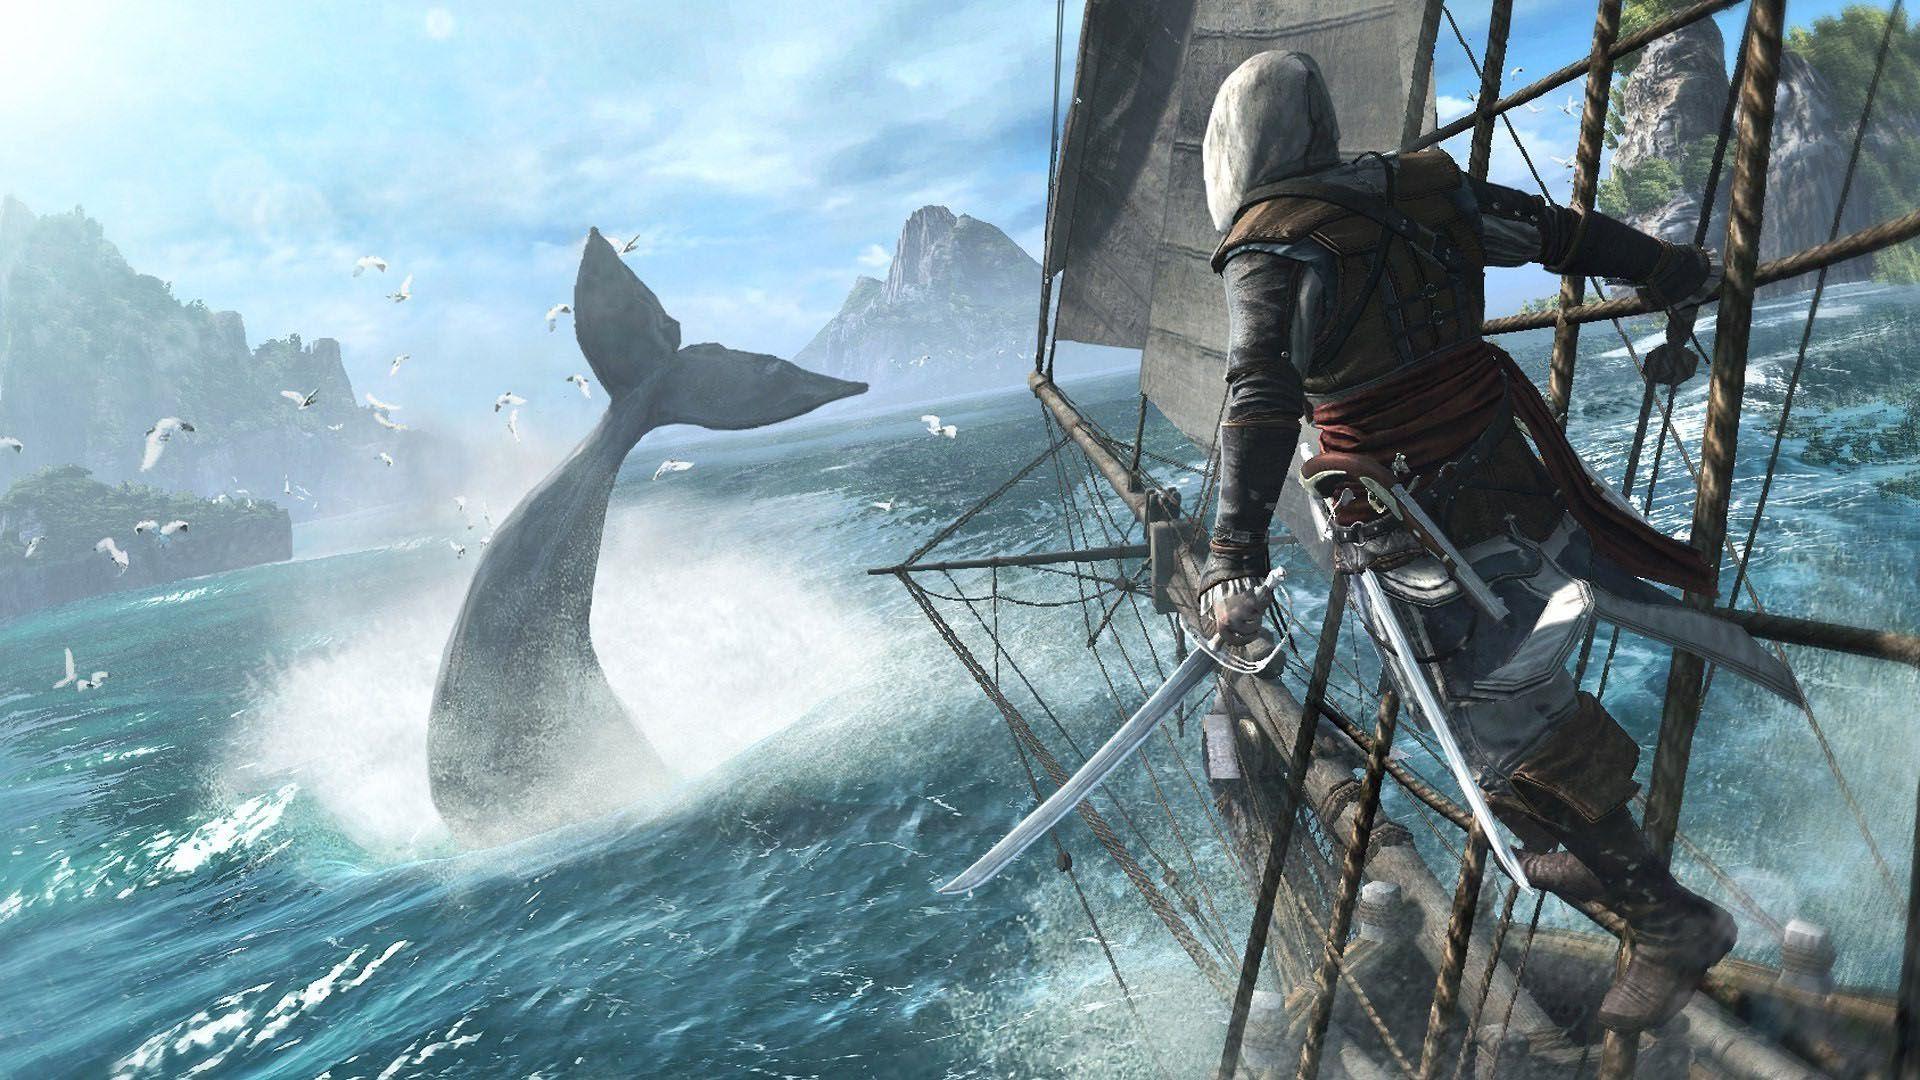 Edward chasing the whale, Assassin's Creed IV: Black Flag